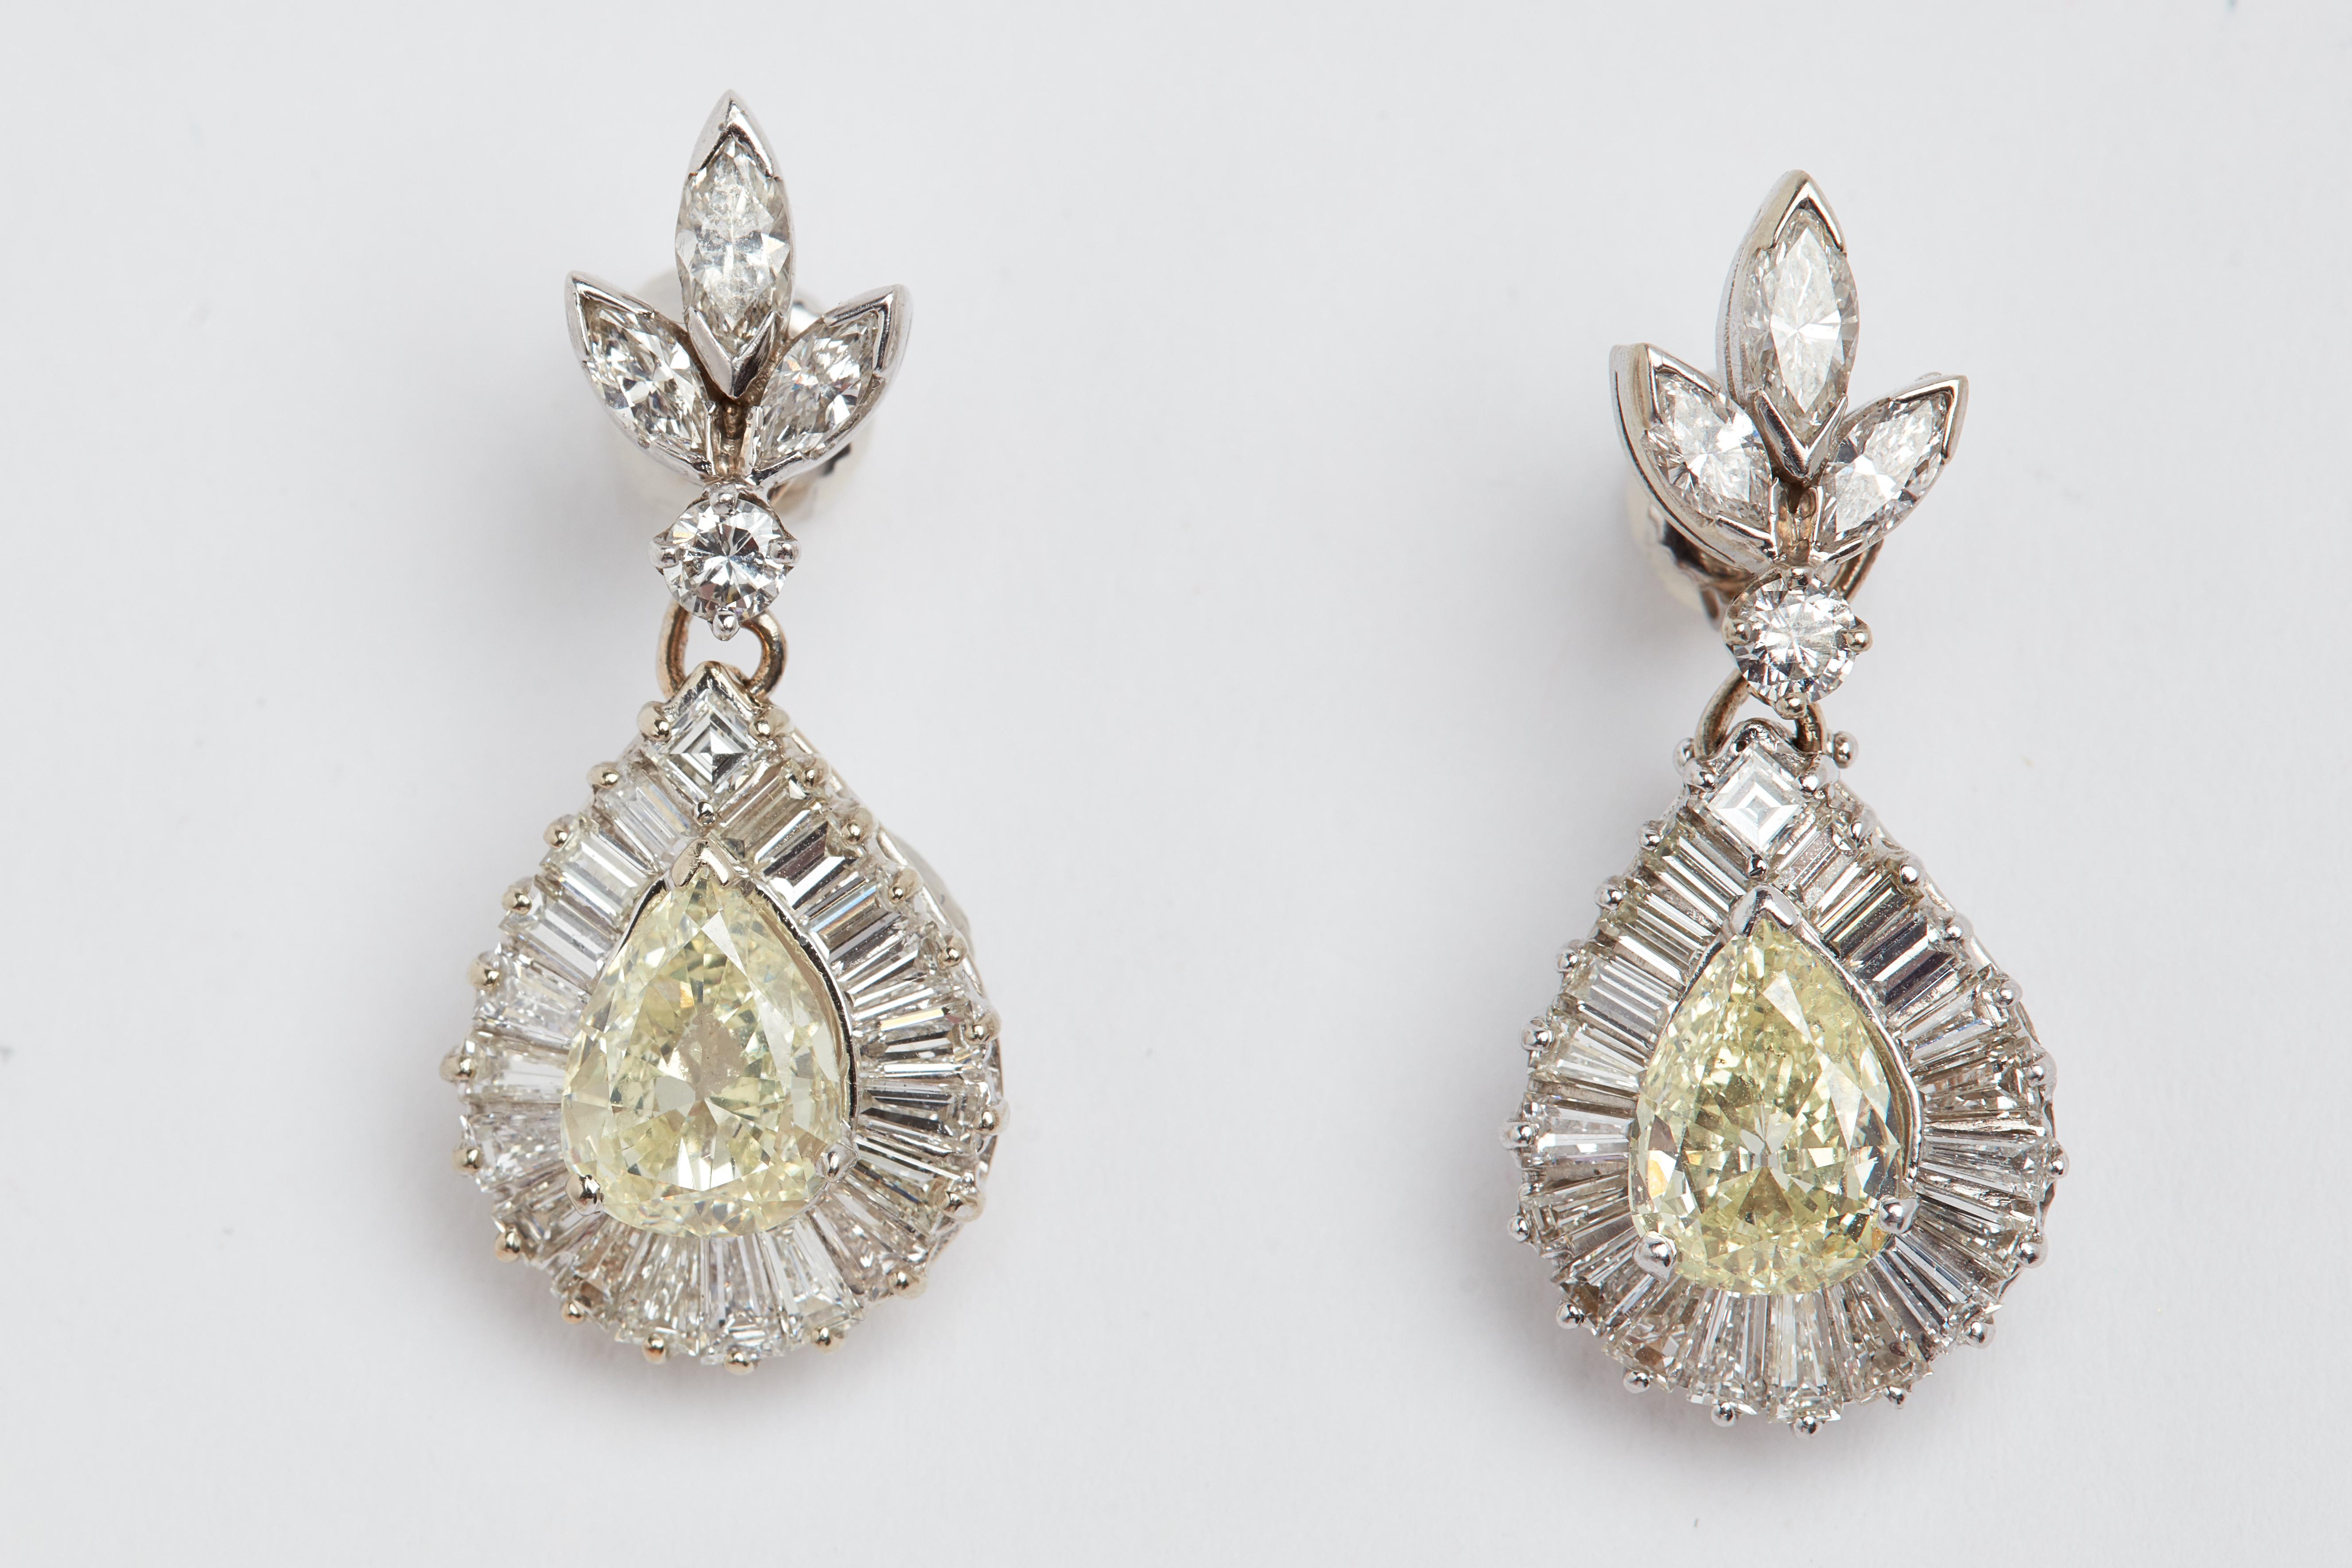 18k White Gold Natural Fancy Yellow and White Diamond Earrings. 2 pear shape center stones weight approximately 2.31 carats total weight. All white diamonds approximately 4.50 carats total weight. 